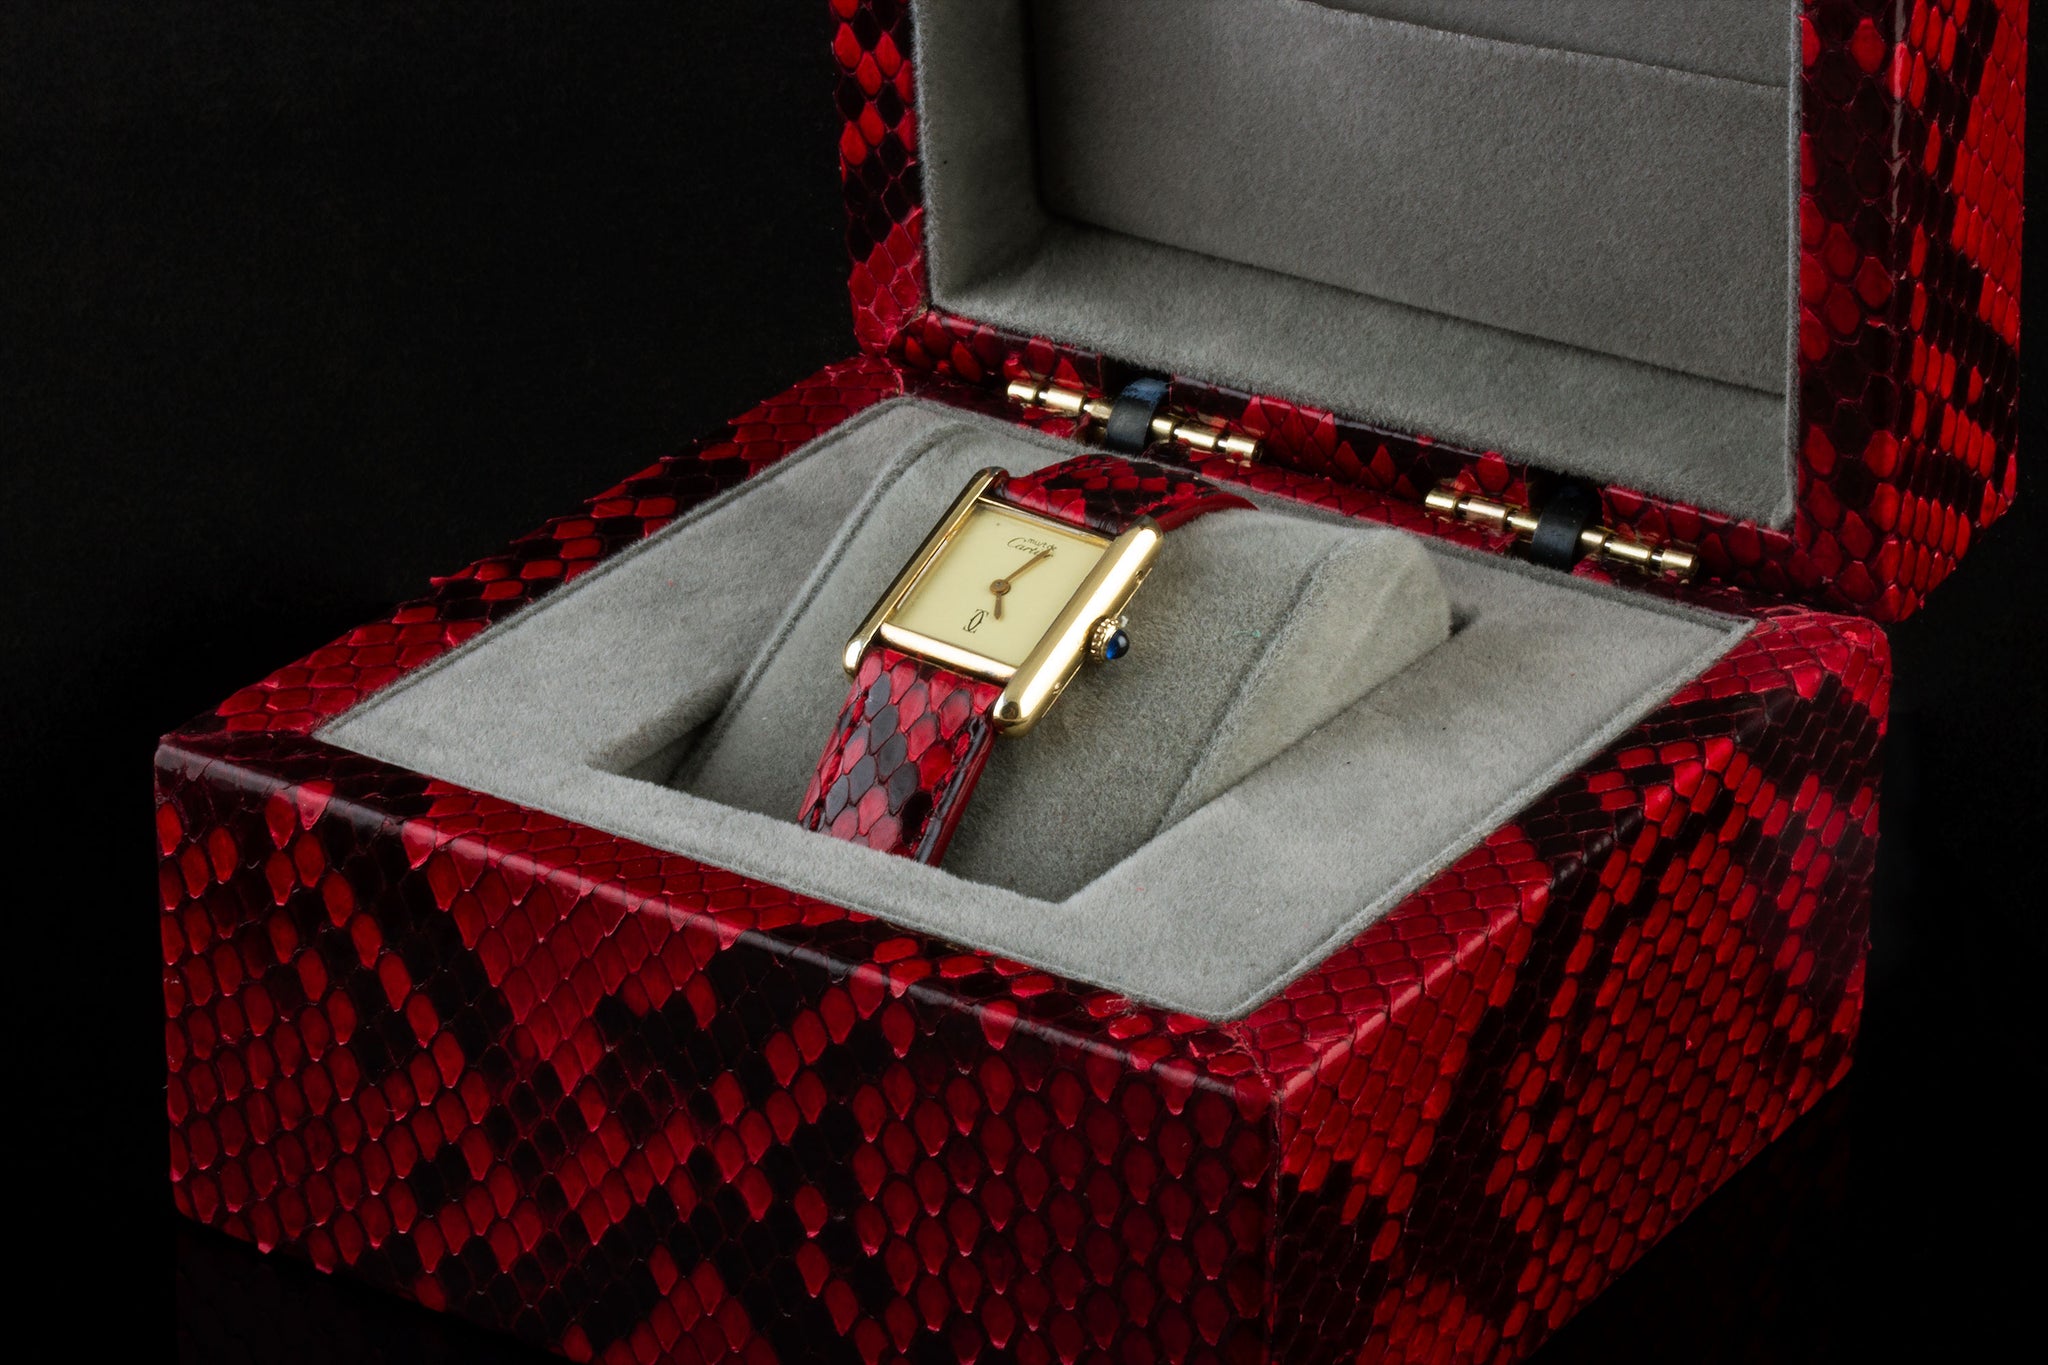 Cartier Tank Must - "Valentine" leather watch strap - Red and black python